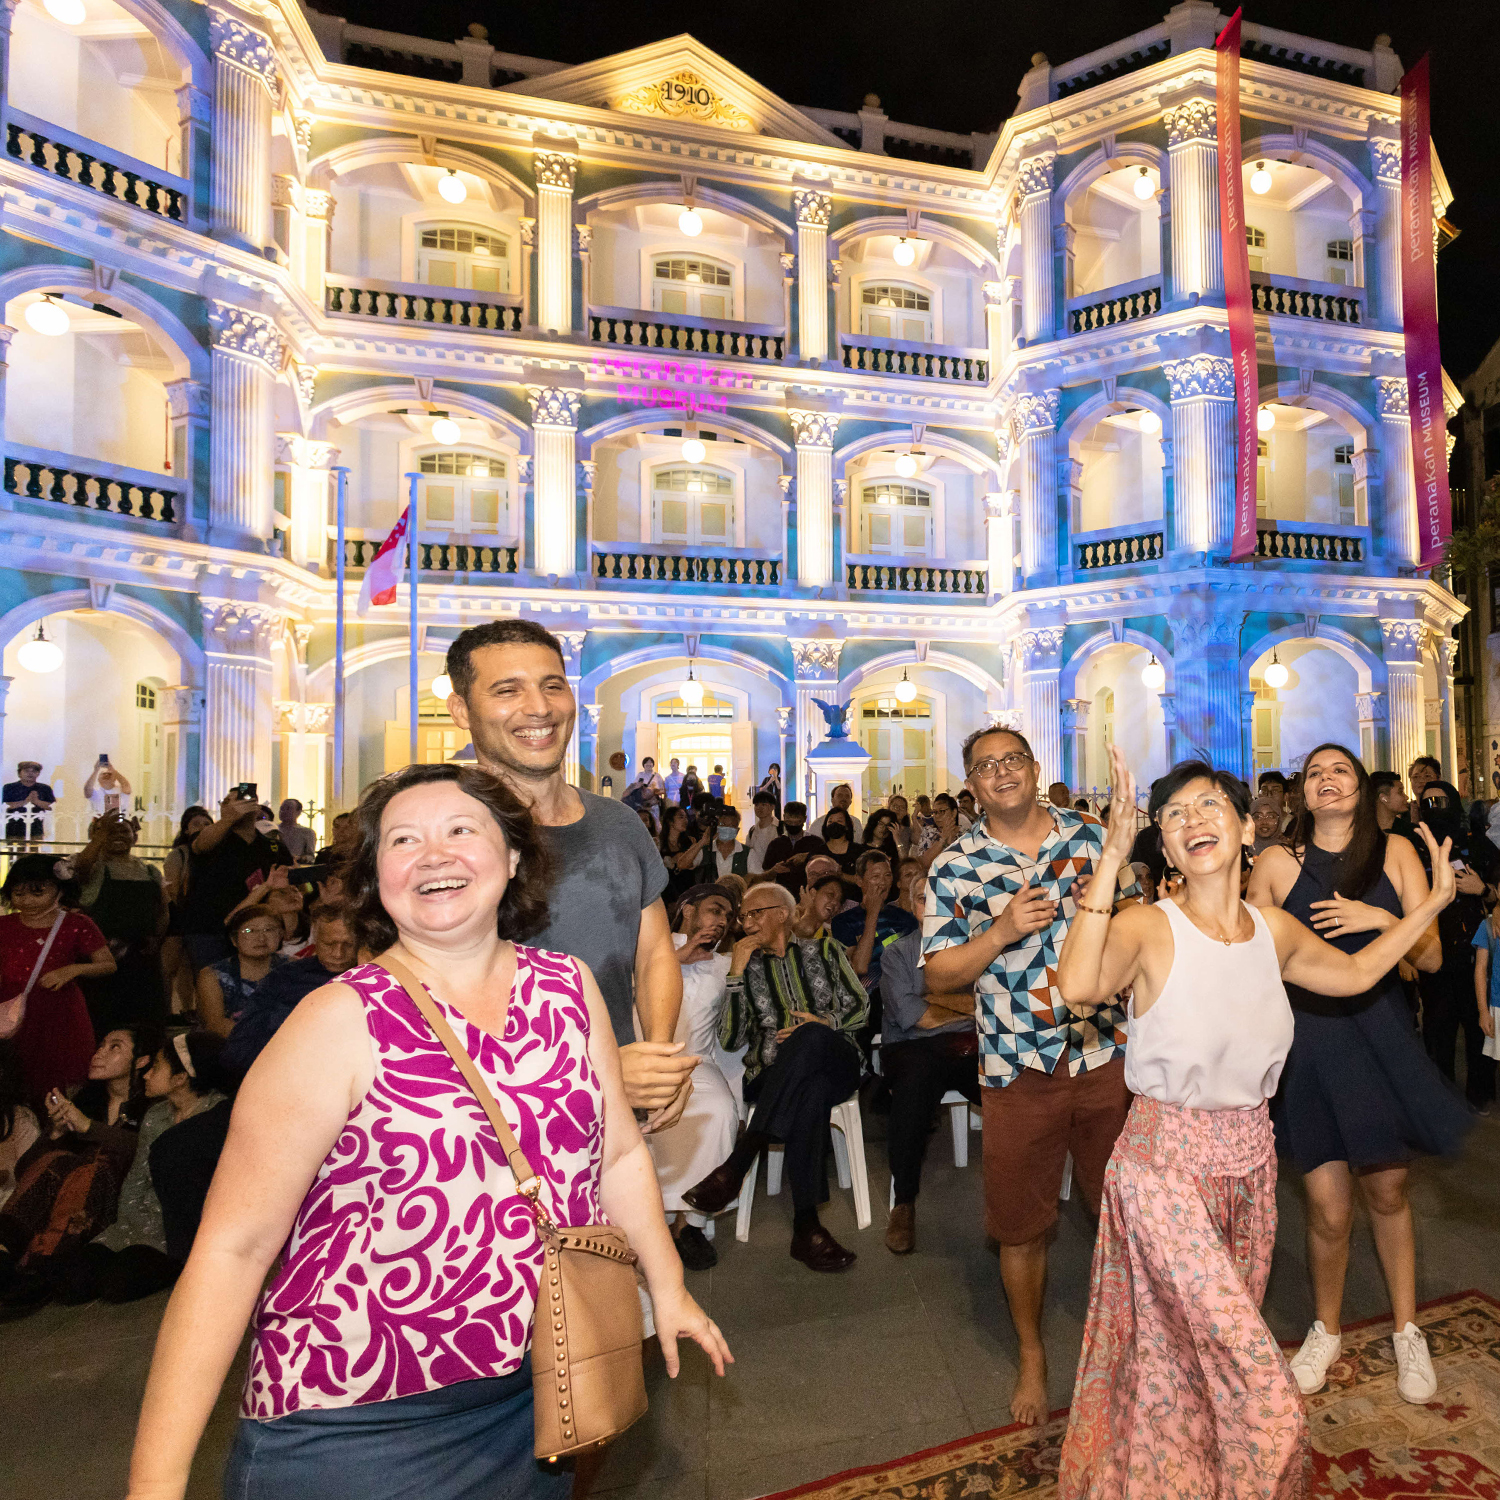 Wide shot of people enjoying the festivities in front of the Peranakan Museum